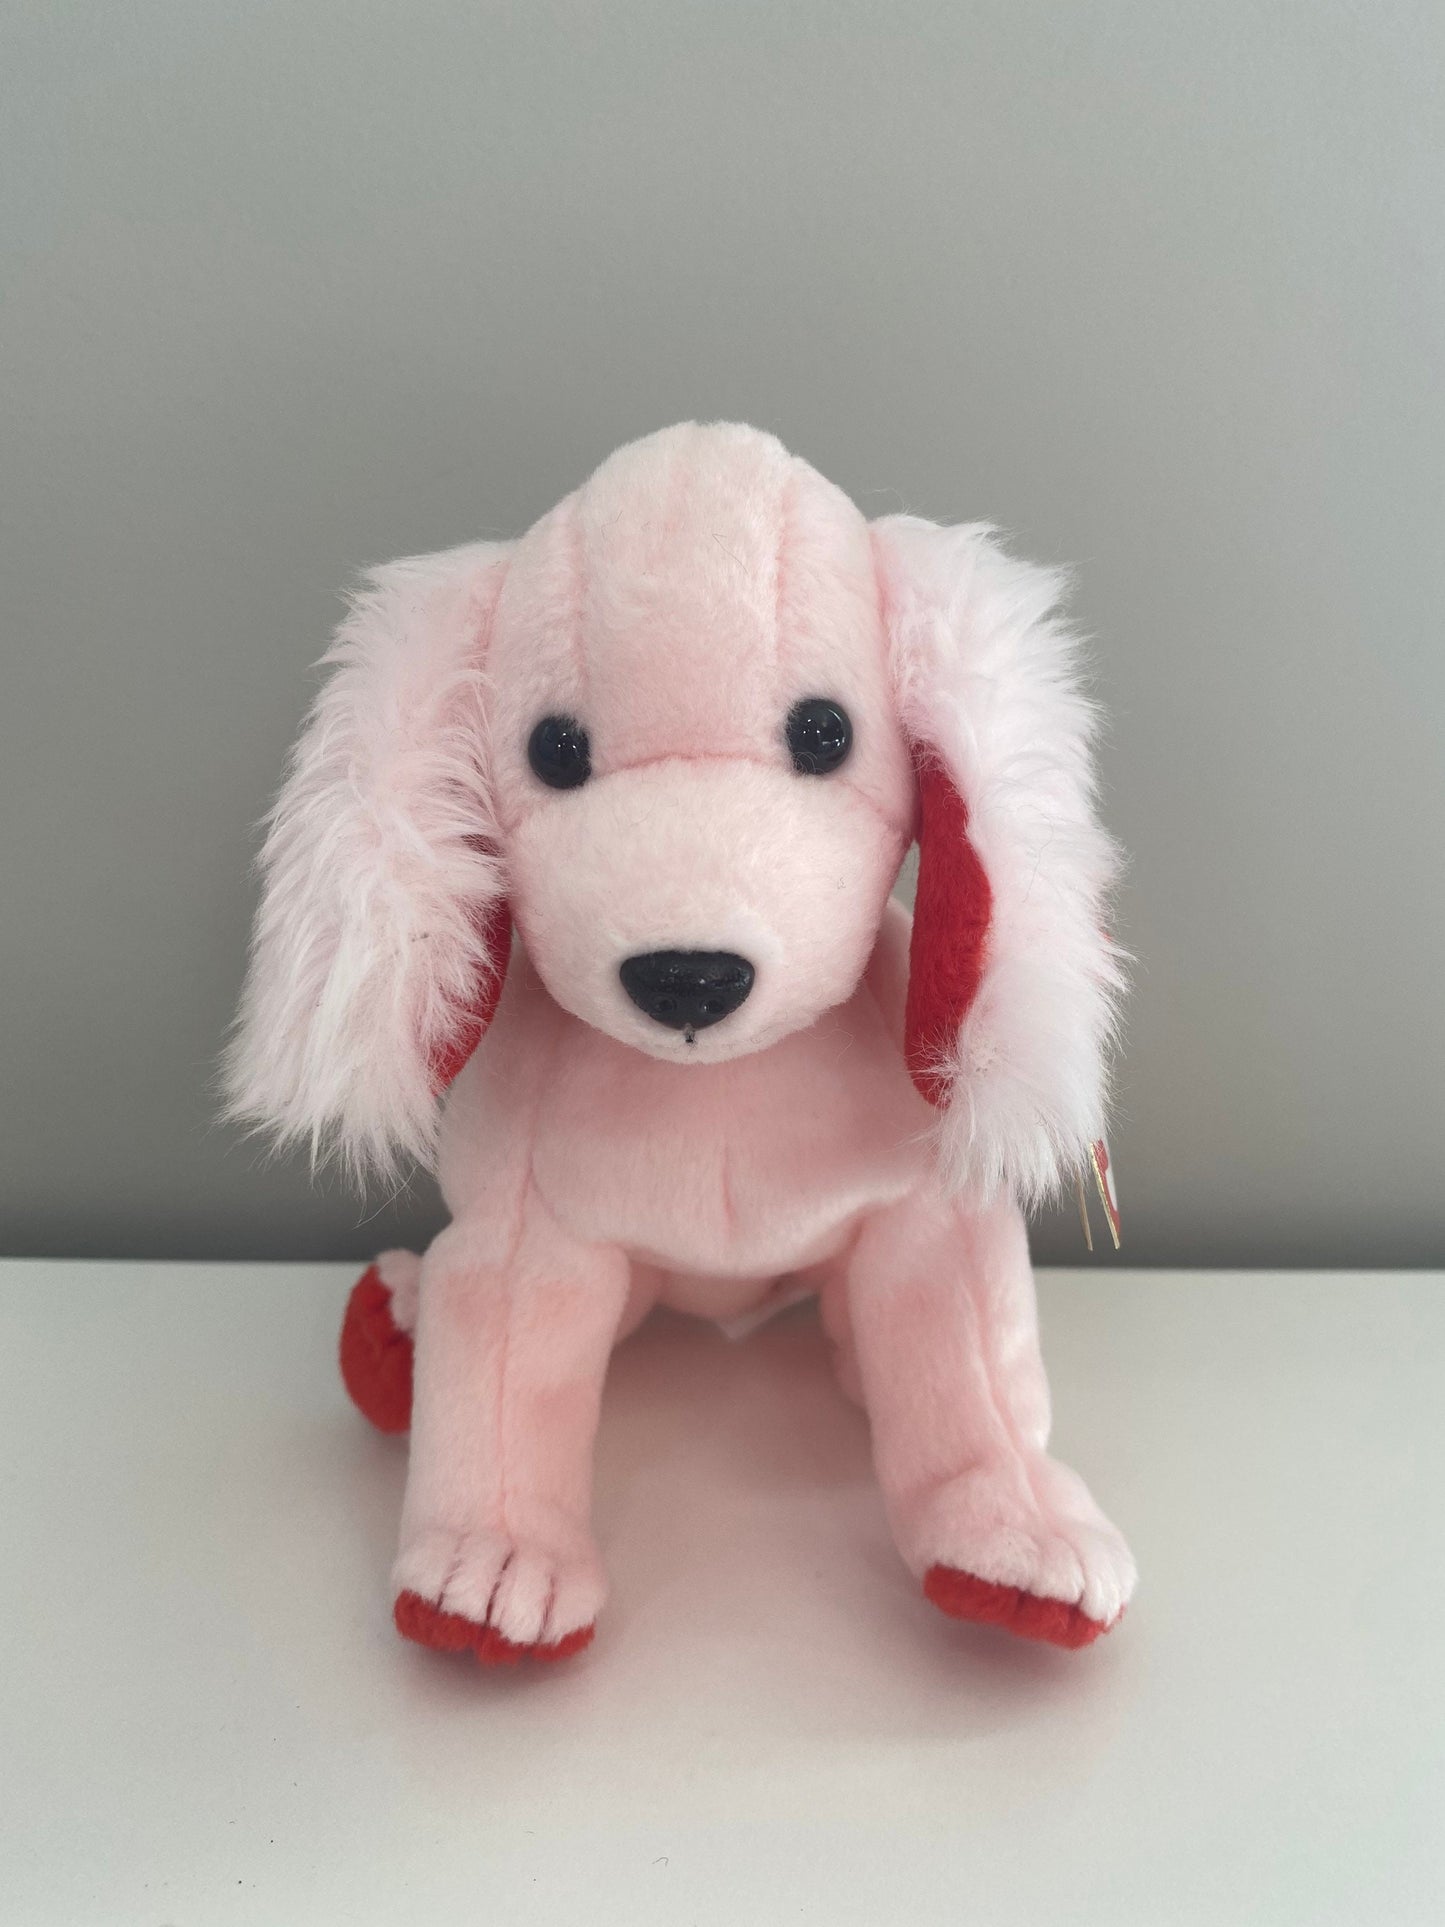 Ty Beanie Baby “Sonnet” the Pink Poodle Plush! (6 inch)